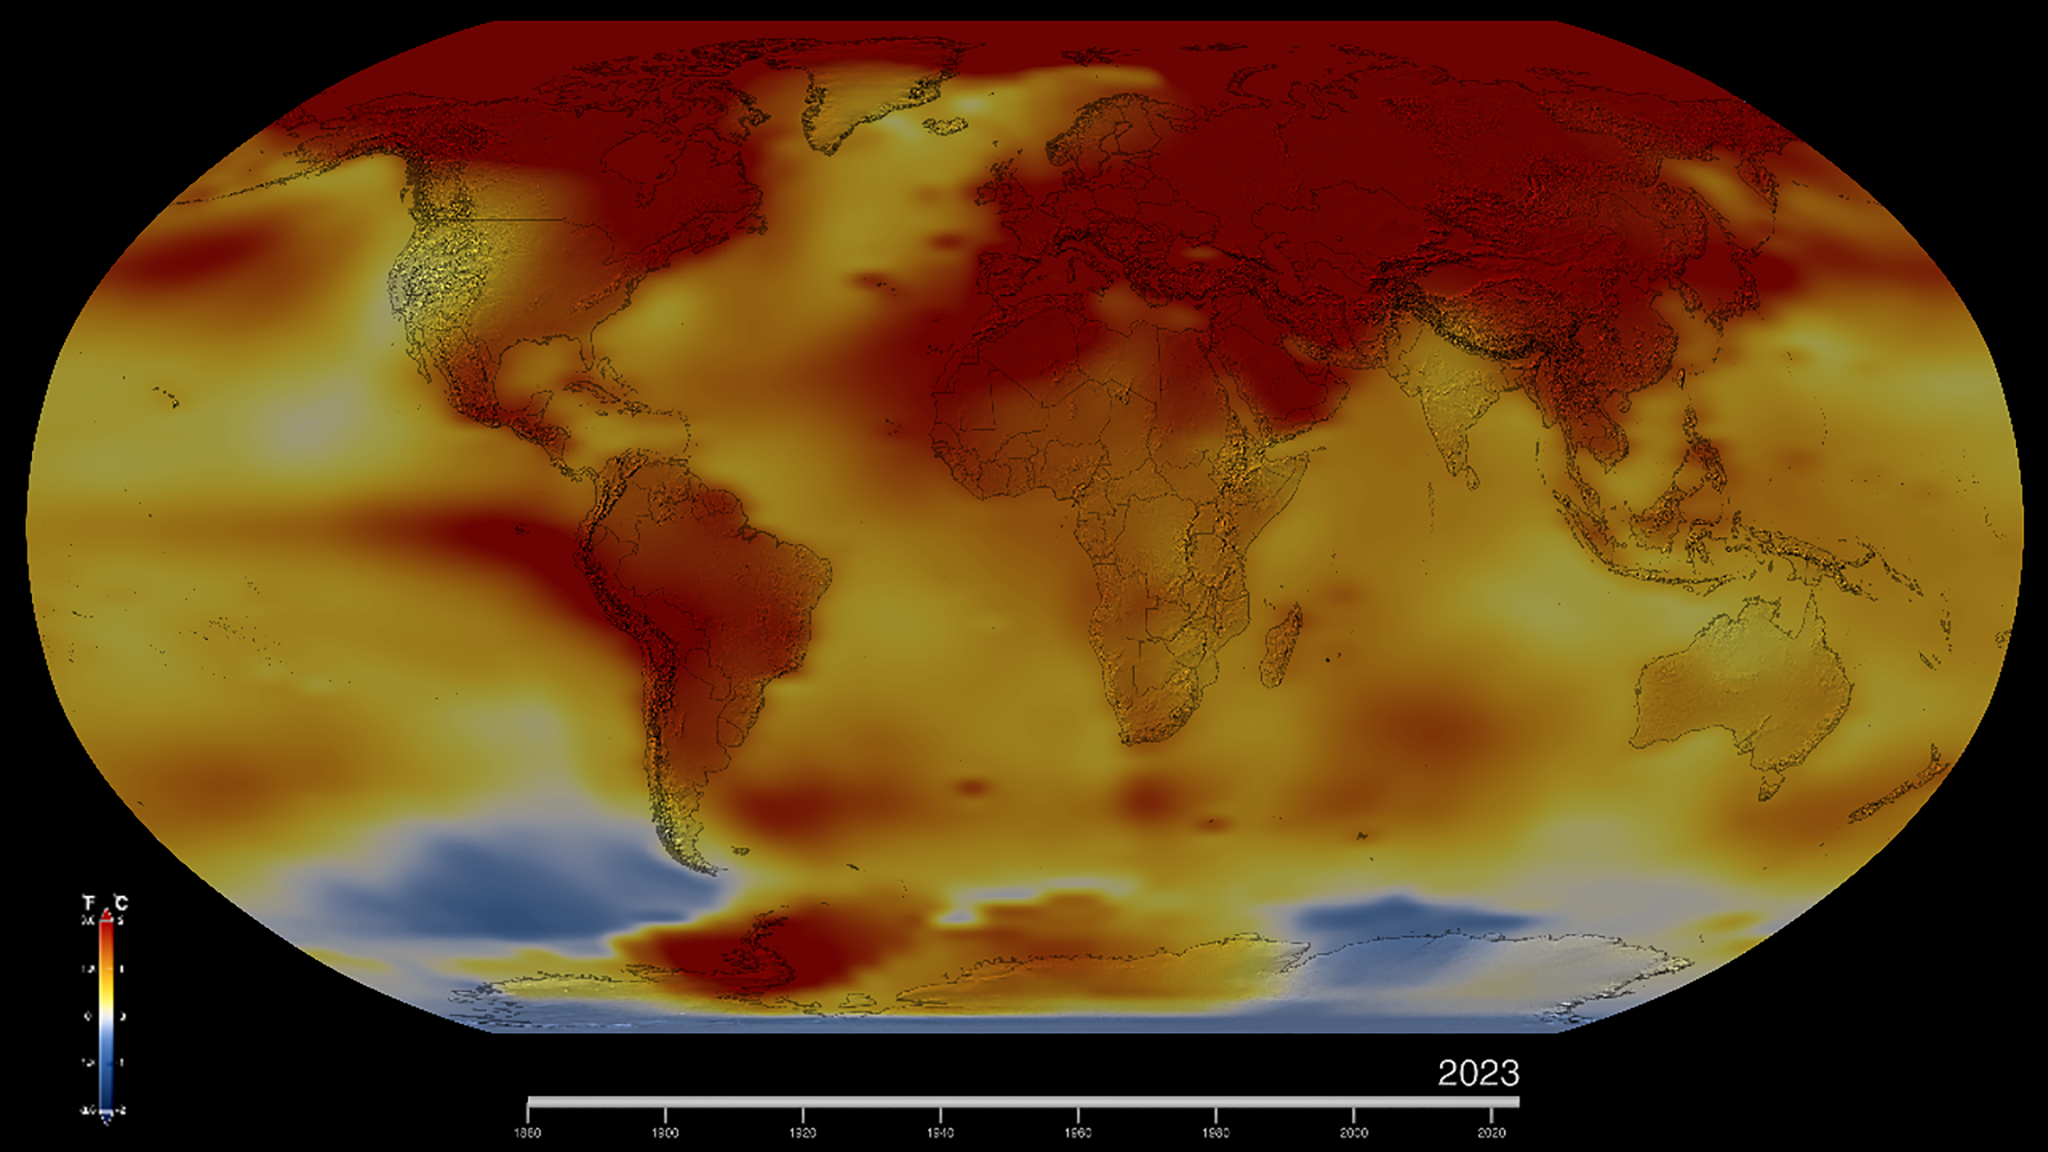 Data visualization of global temperature anomalies progressing from 1880 to 2023 mapped onto Earth. The map uses color to represent anomalies, ranging from blue for below average temperatures, white for temperatures at baseline, and yellows ranging through oranges and reds to represent higher and higher than average temperatures. At the beginning of the time series, the map is primarily blues and whites, with a few spots of yellow, indicating that temperatures overall are below the baseline. As time progresses, the colors shift and move, with less and less blue and white and more and more yellow, then orange, and red. By 2023, the map is mostly yellow with lots of orange and red. The Arctic region, Europe, Asia, North America, central South America, and the Antarctic peninsula are all dark red, indicating the highest temperature anomalies.